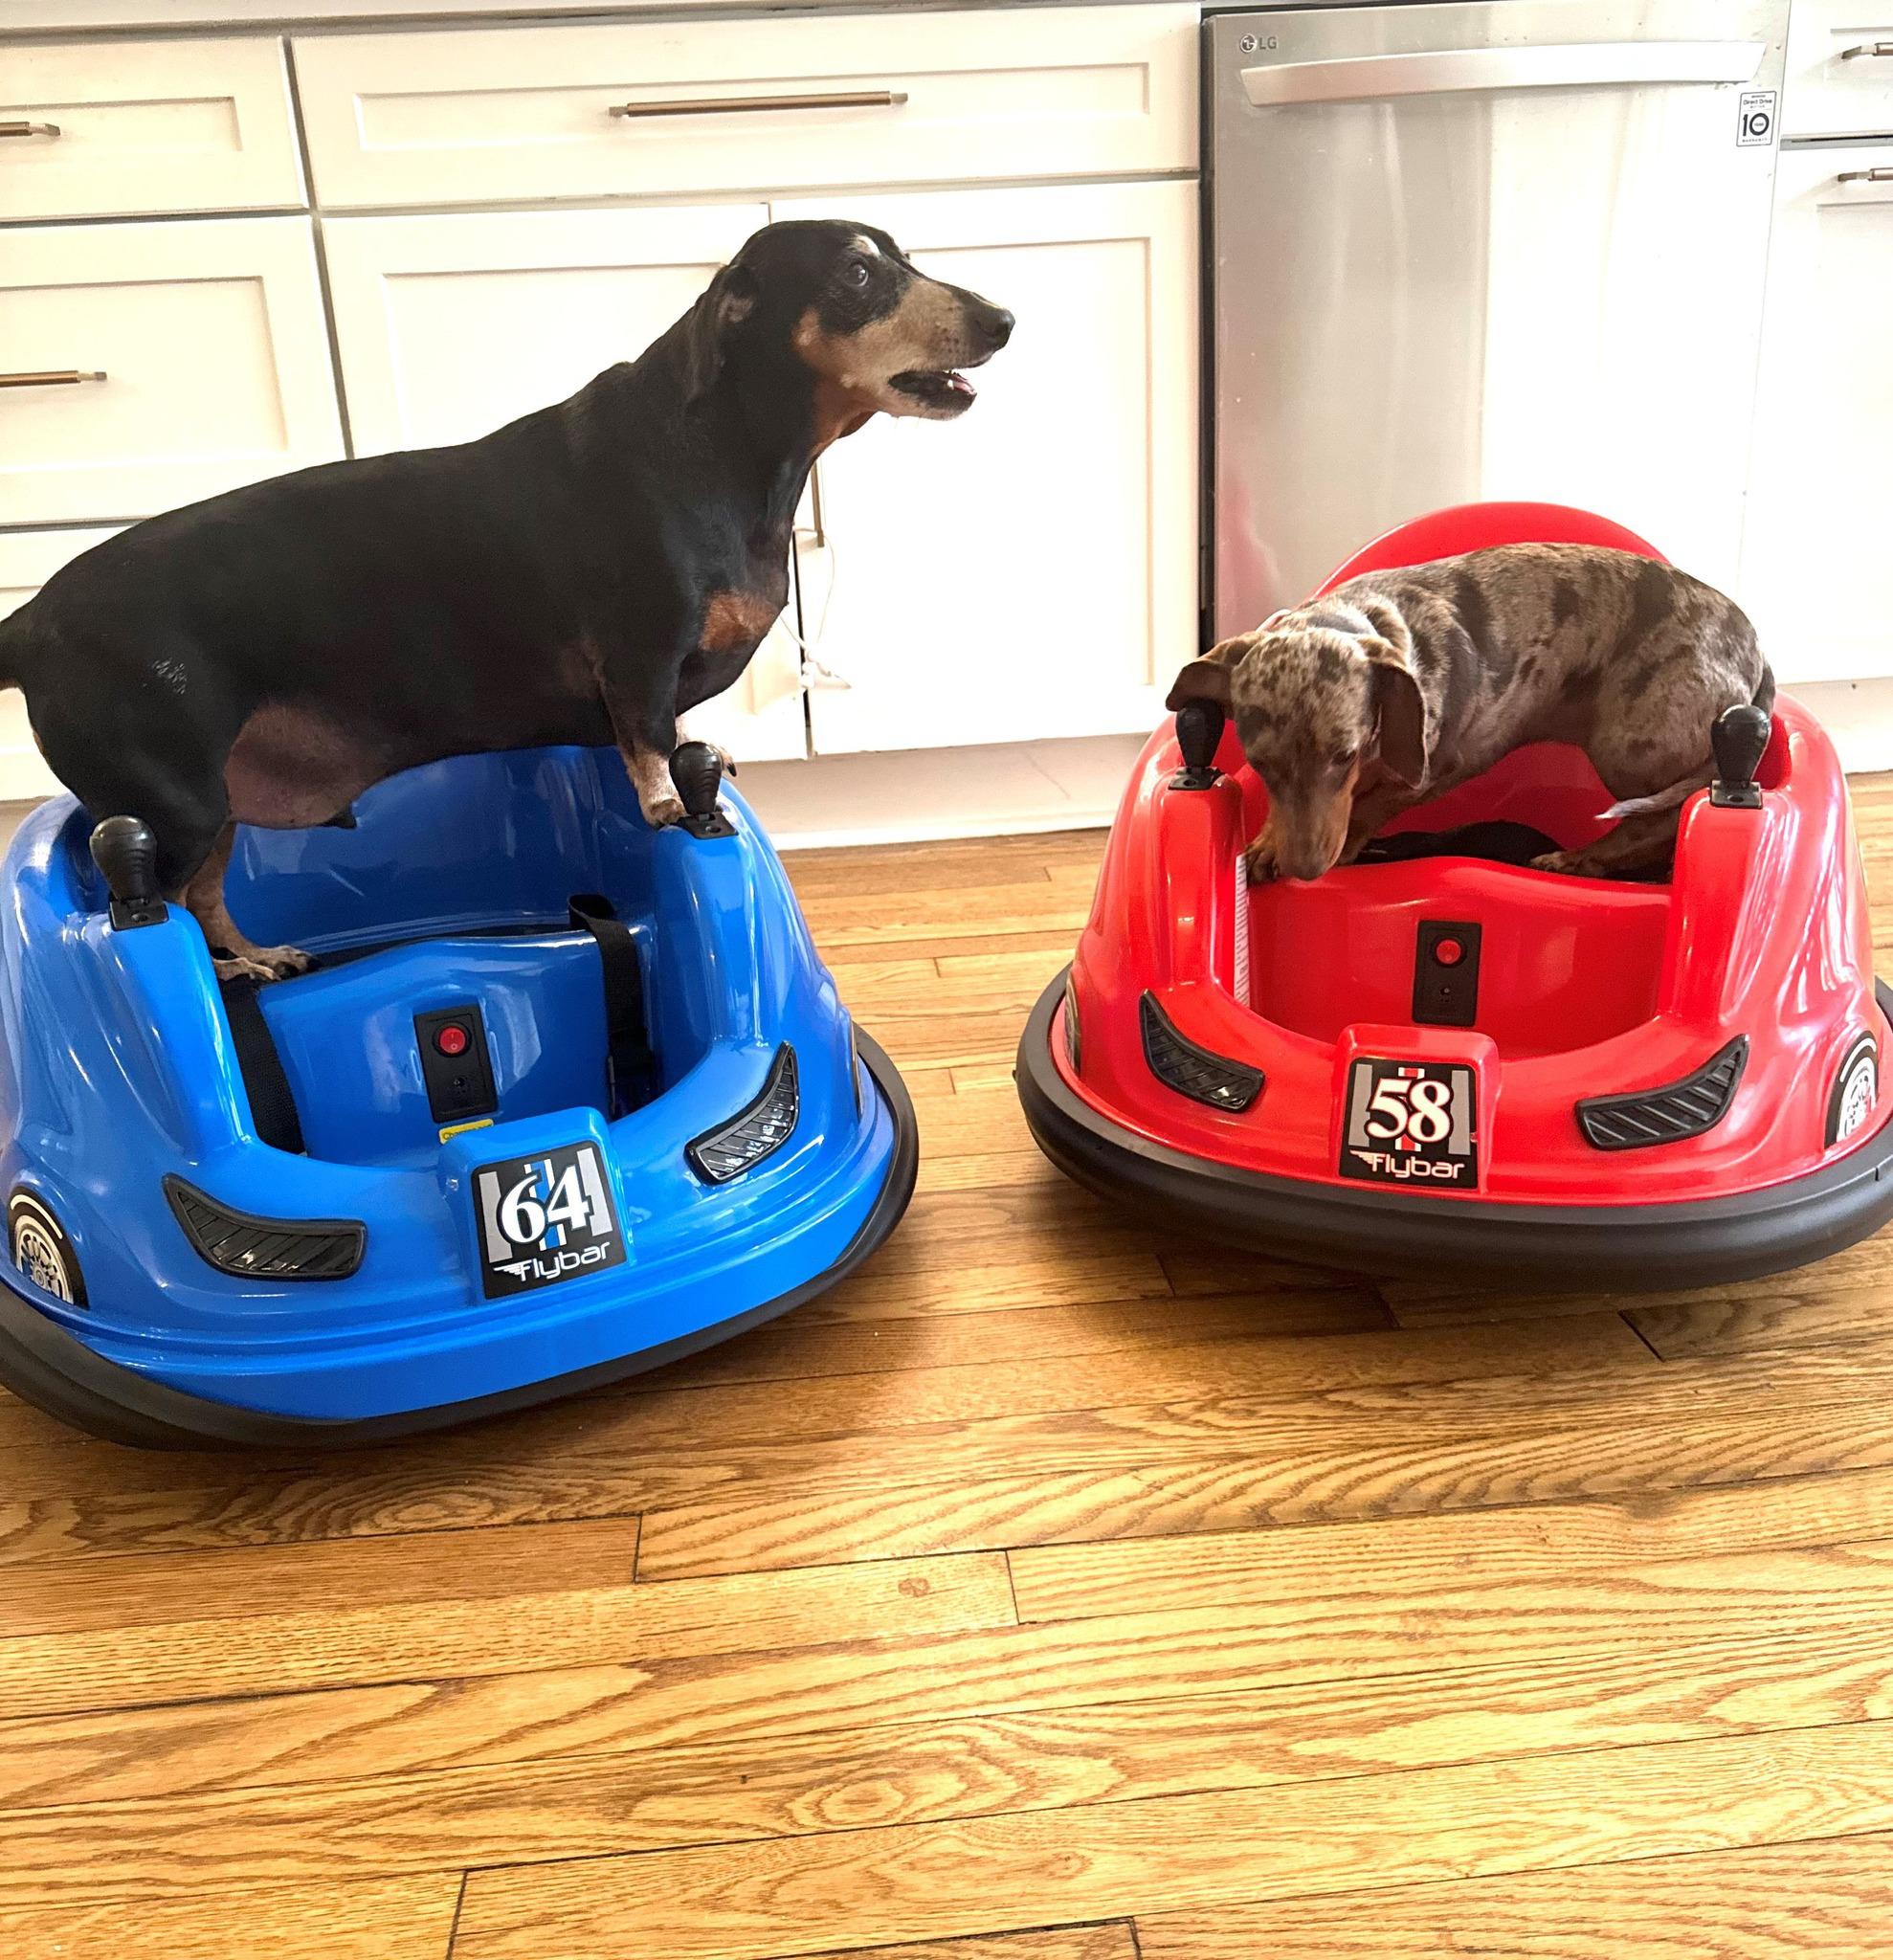 Don't play bumper cars with your auto insurance ... you never know who is on the road! Contact us for a comprehensive review of your coverages.

📍412 W Gordon Street, Thomaston, GA 30286
☎️(706)  647-5353